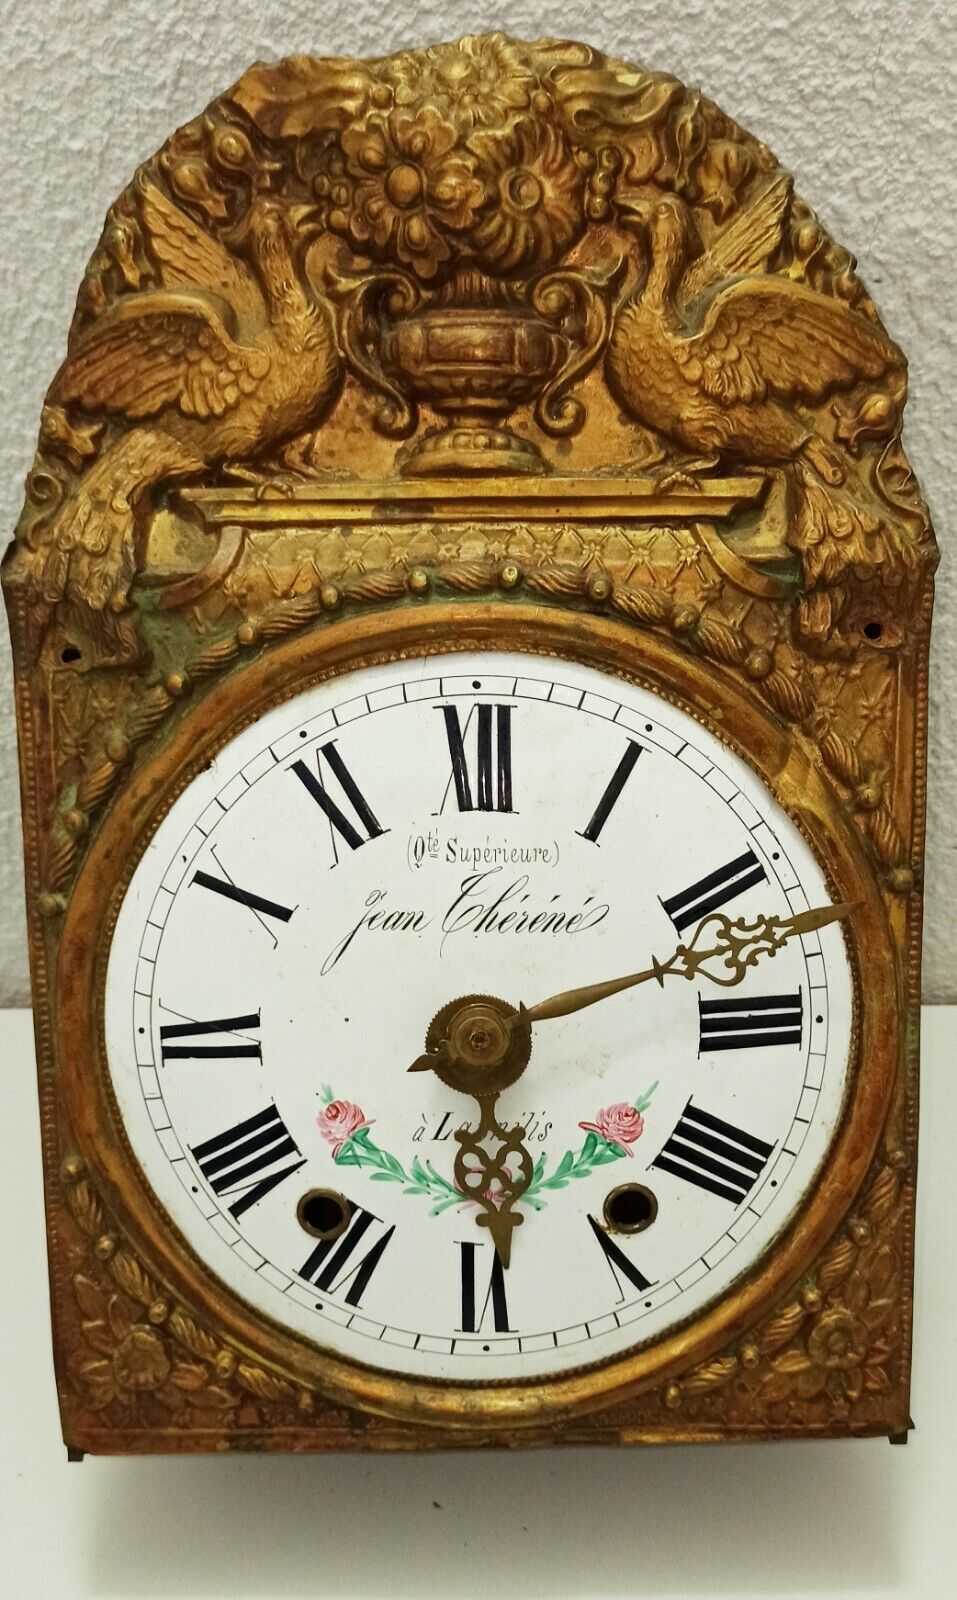 BEAUTIFUL FRENCH MORBIER COMTOISE CLOCK 19TH CENTURY WORKS